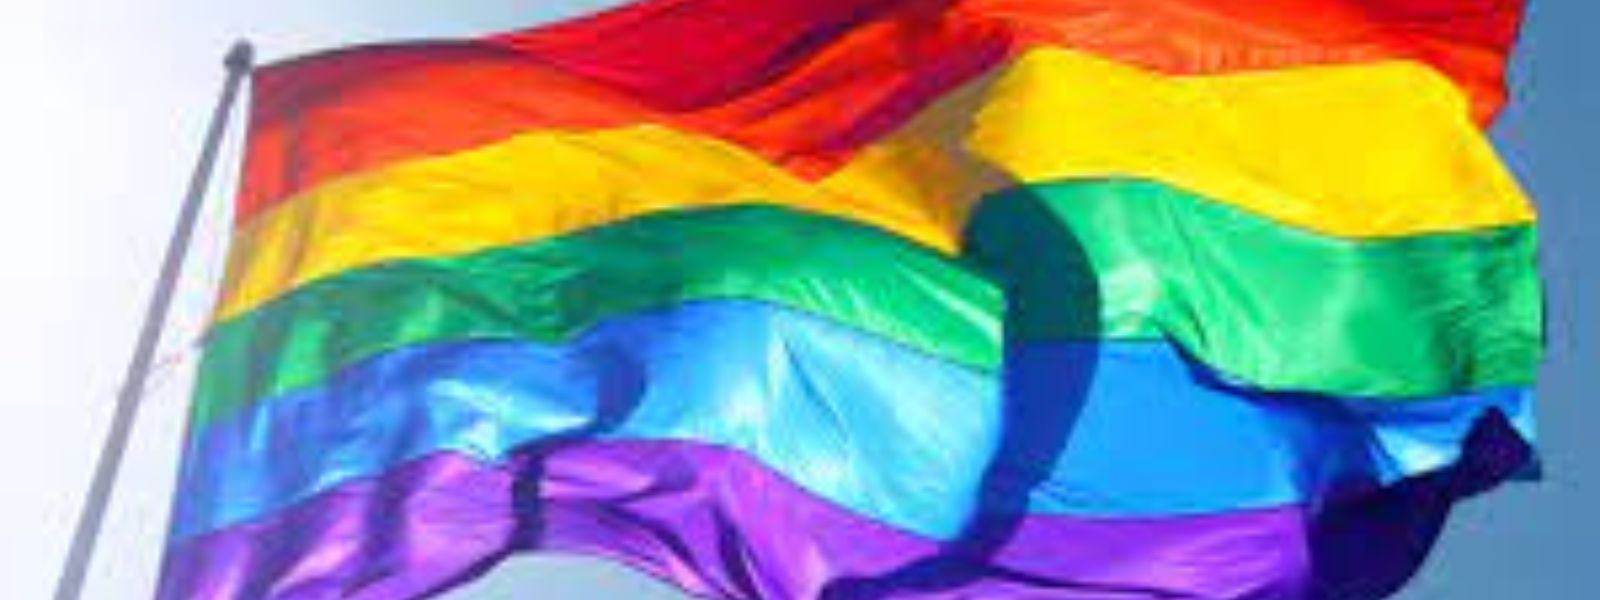 LGBTQ: Penal Code changes before Parliament